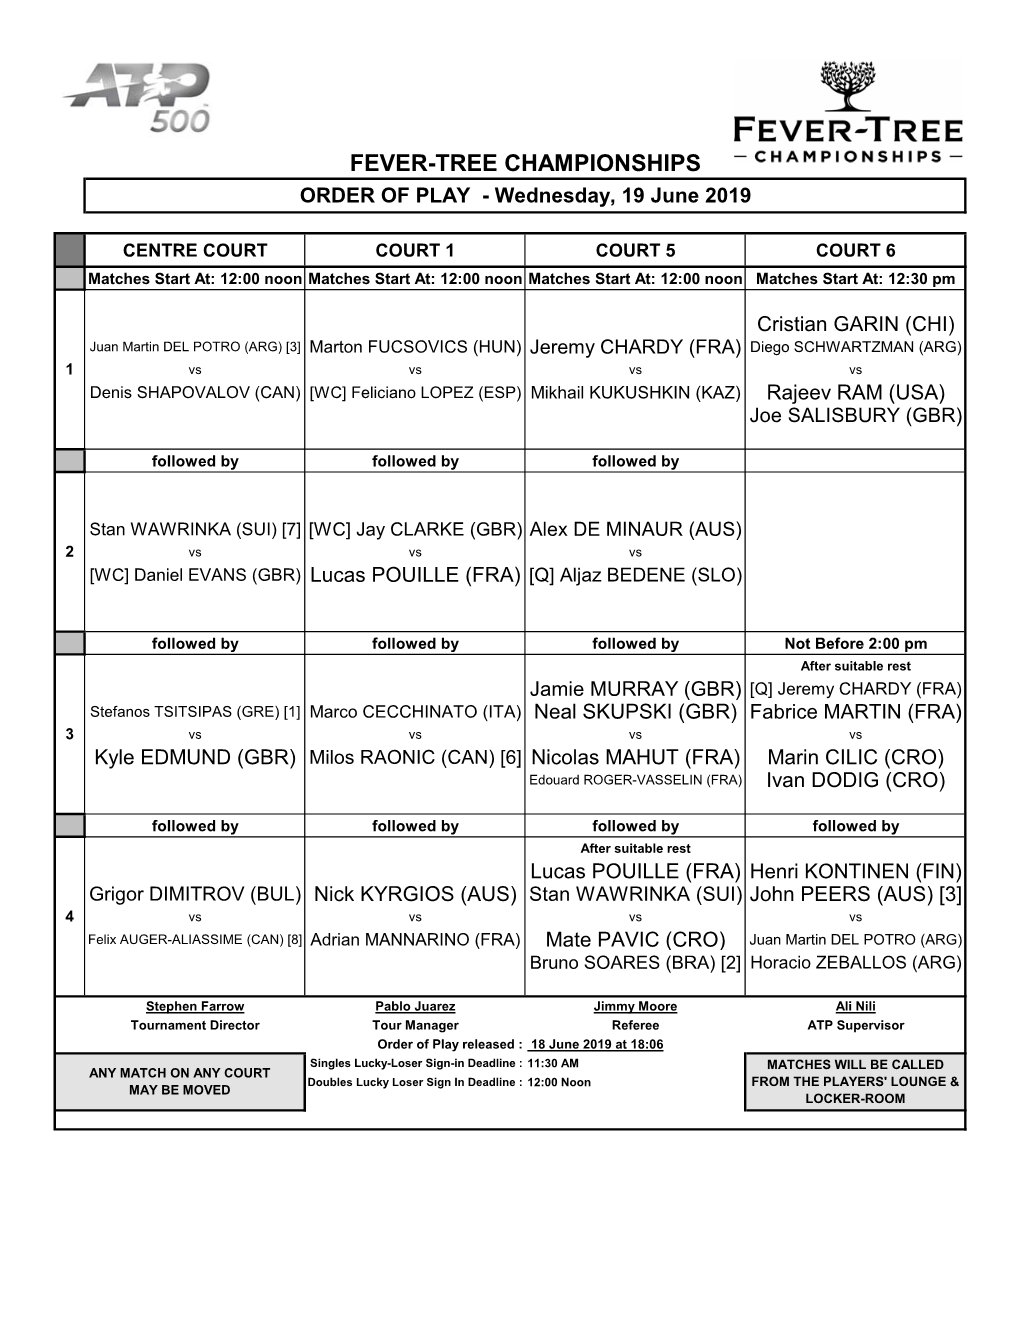 FEVER-TREE CHAMPIONSHIPS ORDER of PLAY - Wednesday, 19 June 2019